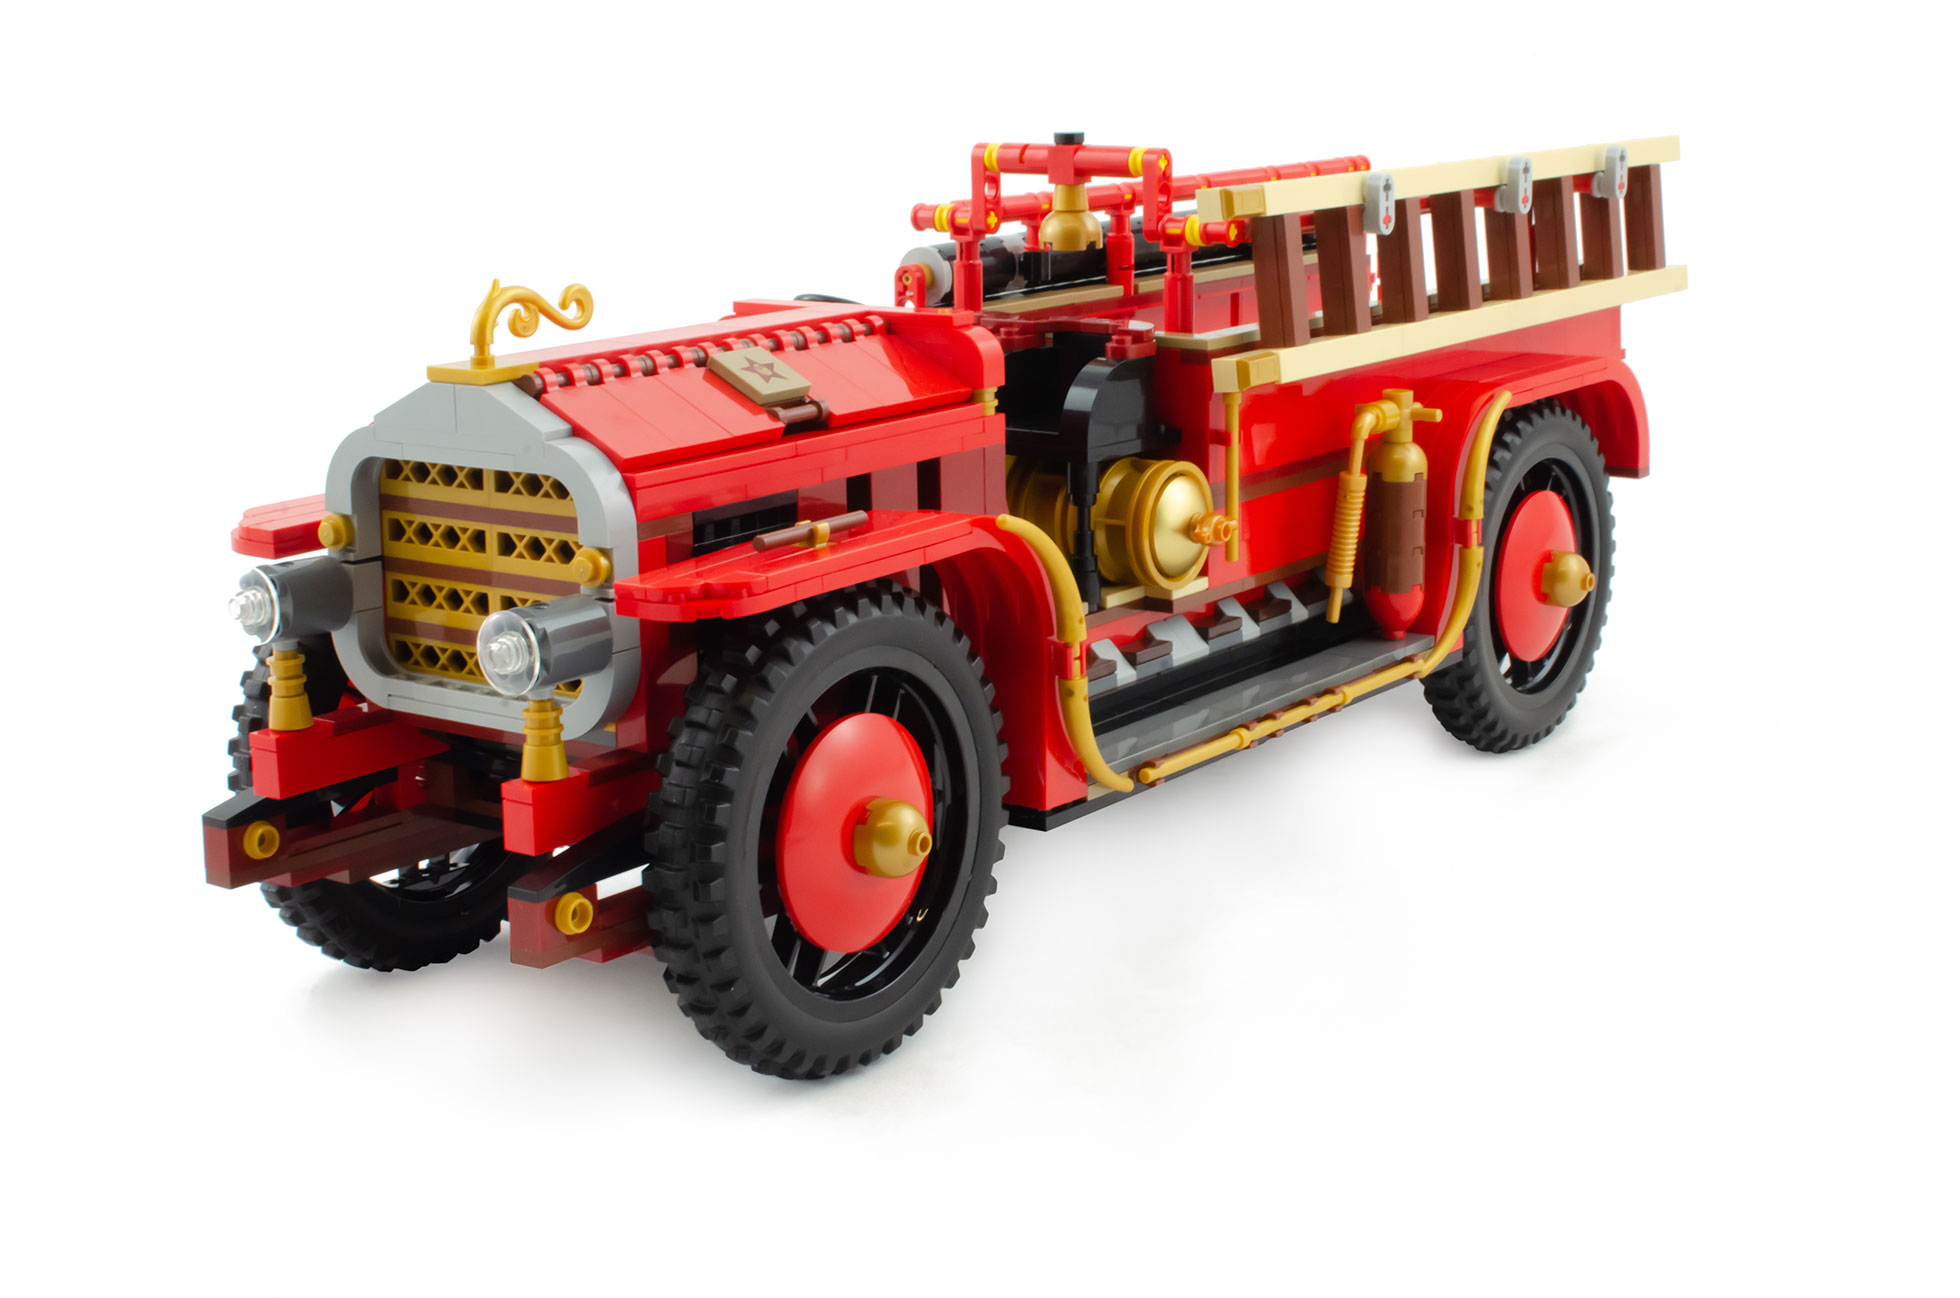 Antique Fire Engine] Inspired by early 